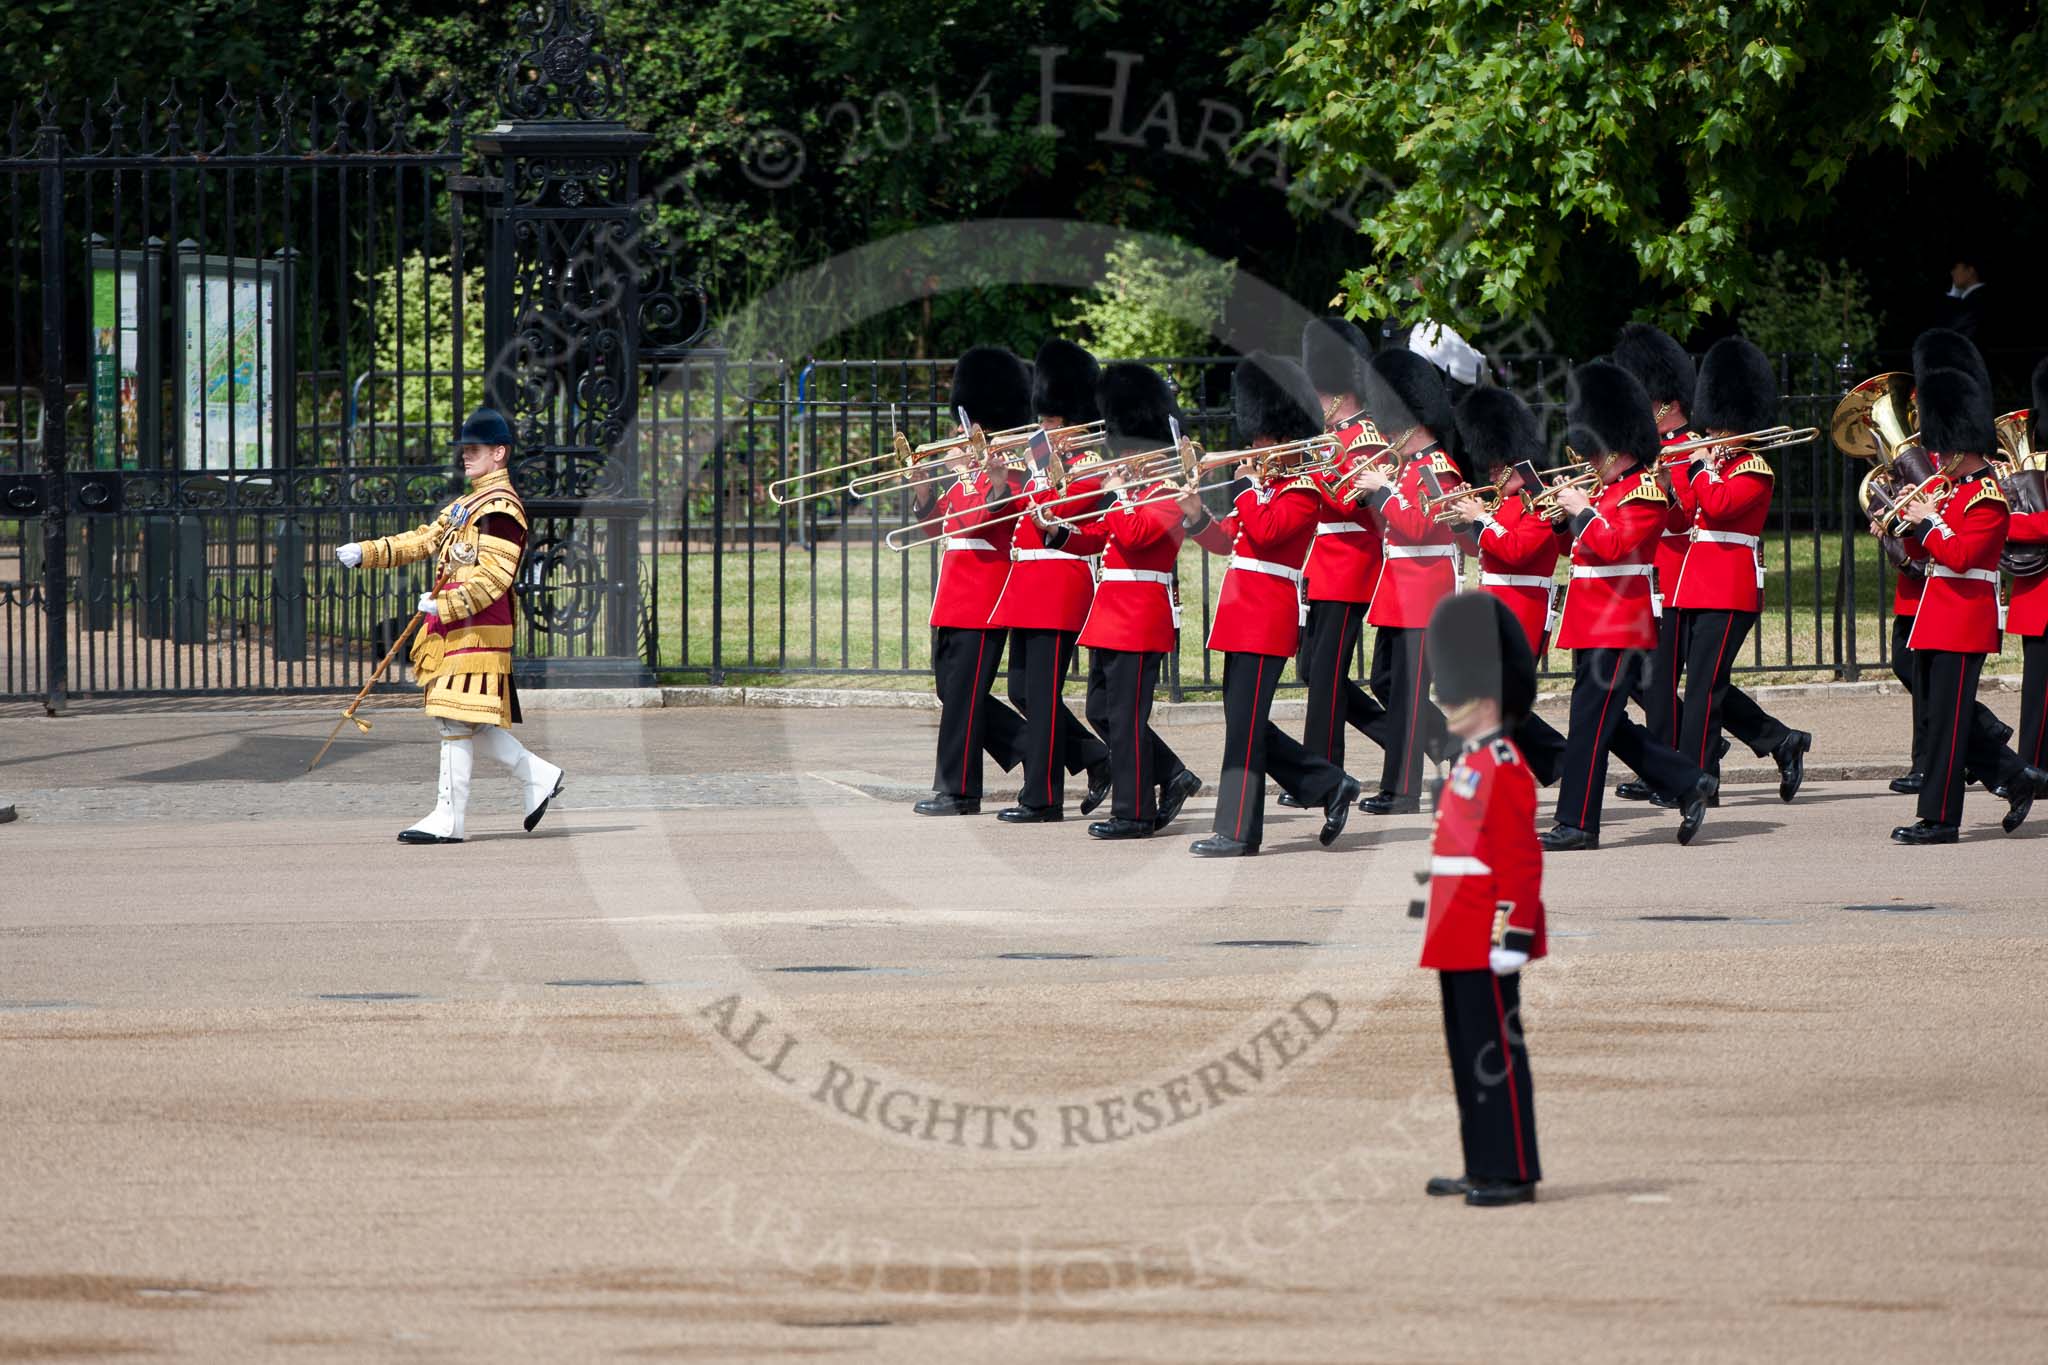 Trooping the Colour 2009: Drum Major S O'Brien, Welsh Guards, leading the Band of the Coldstream Guards along St. James's Park towards Horse Guards Parade..
Horse Guards Parade, Westminster,
London SW1,

United Kingdom,
on 13 June 2009 at 10:20, image #34